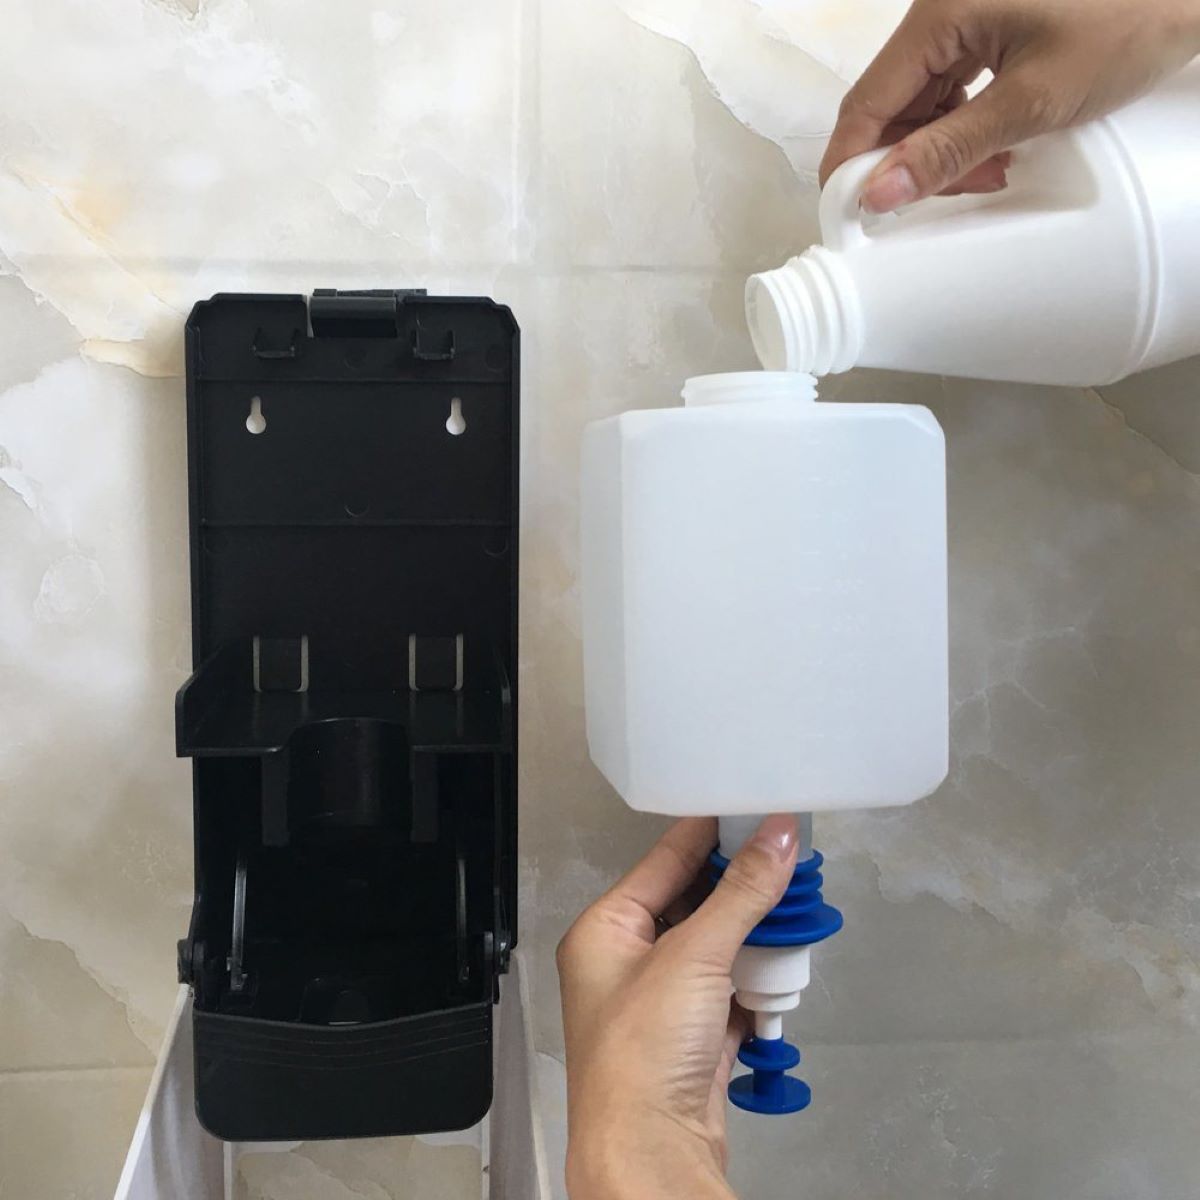 How To Refill A Soap Dispenser